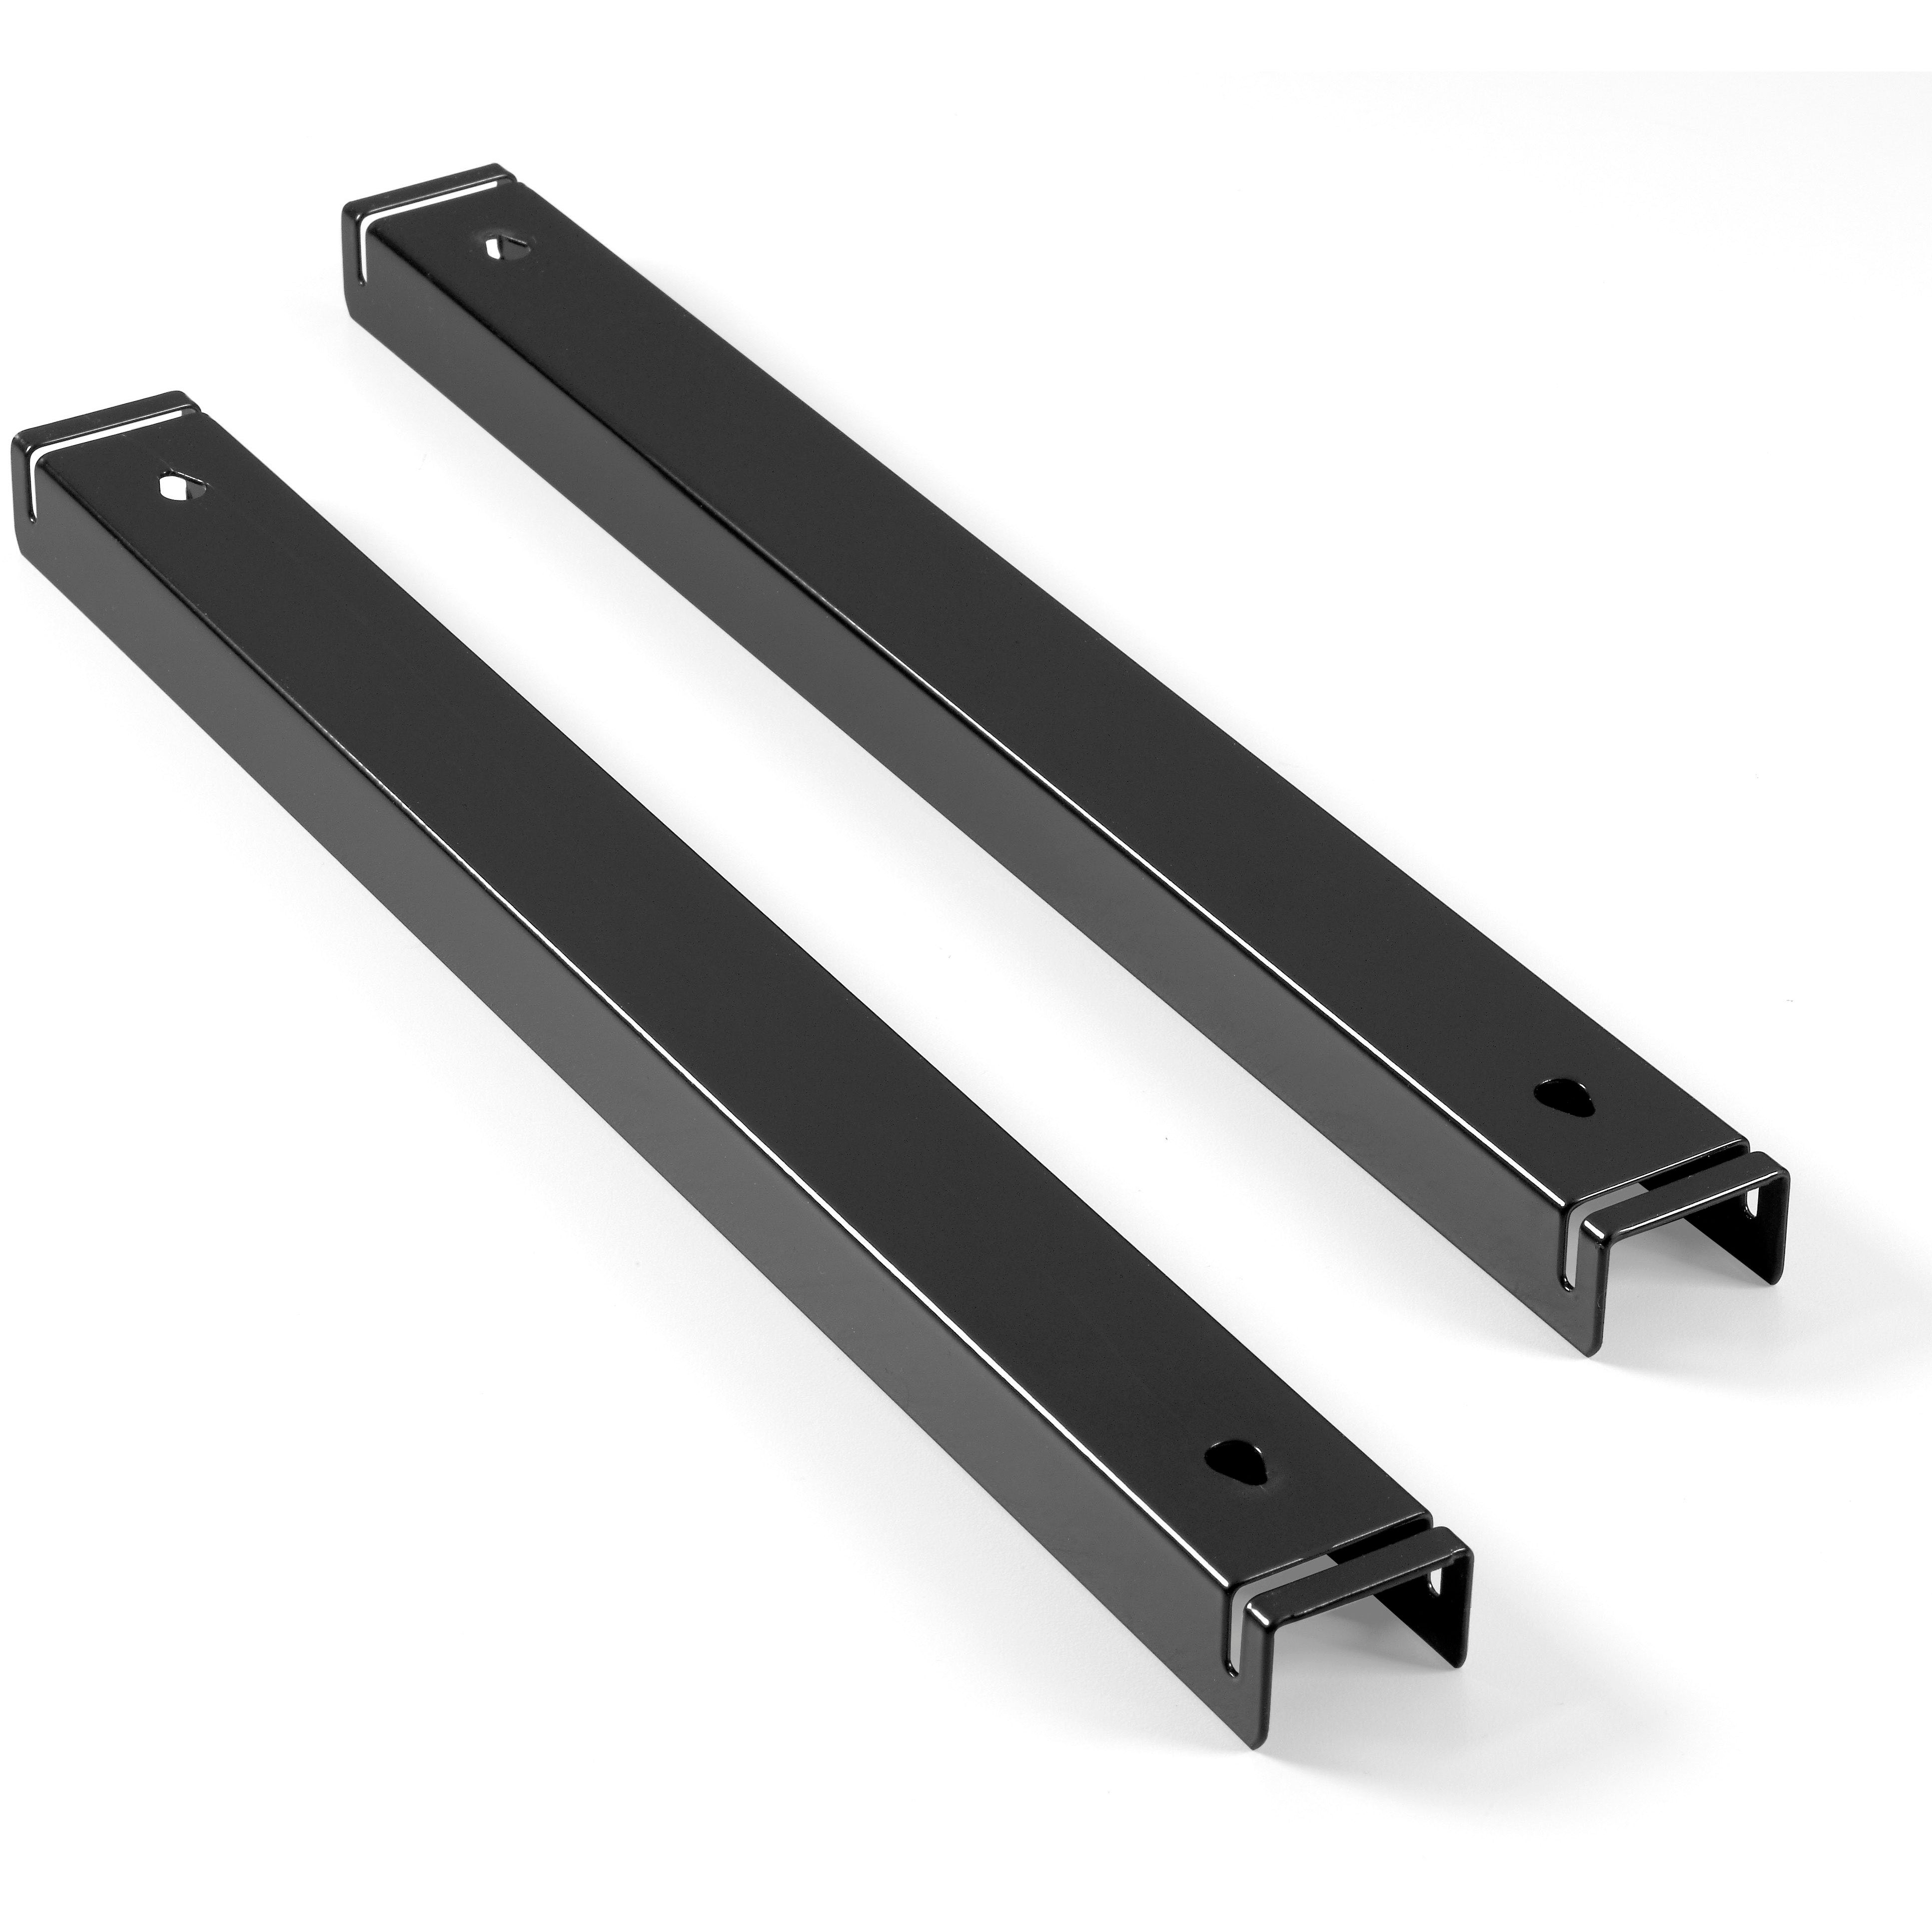 Tennsco Lateral File Cross Rods (Qty 2), 15CR